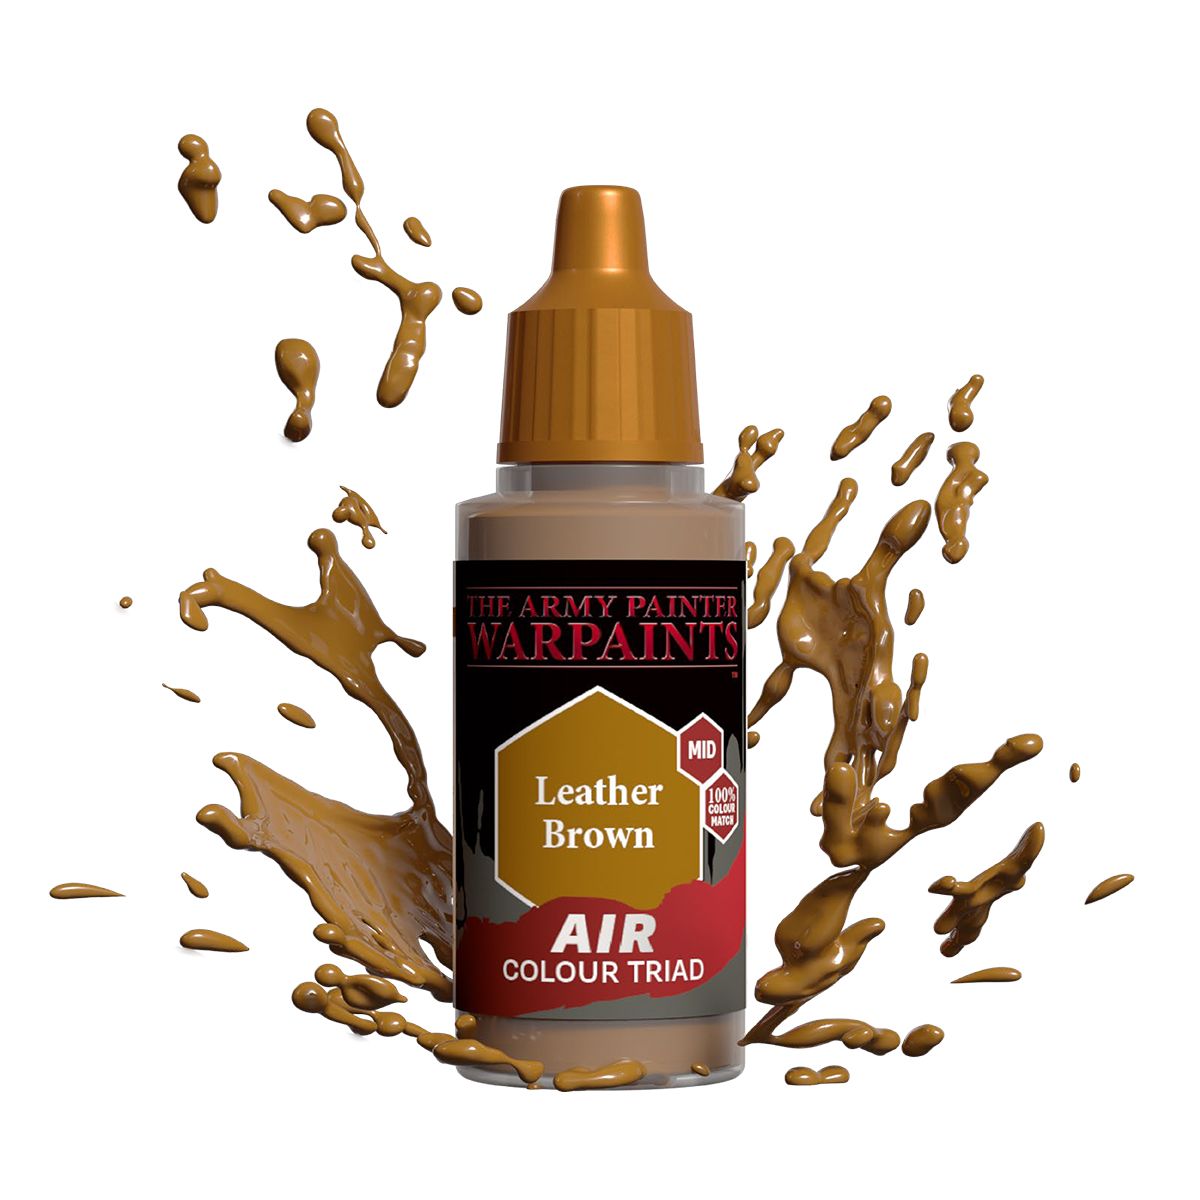 Army Painter Warpaints Air: Leather Brown 18ml